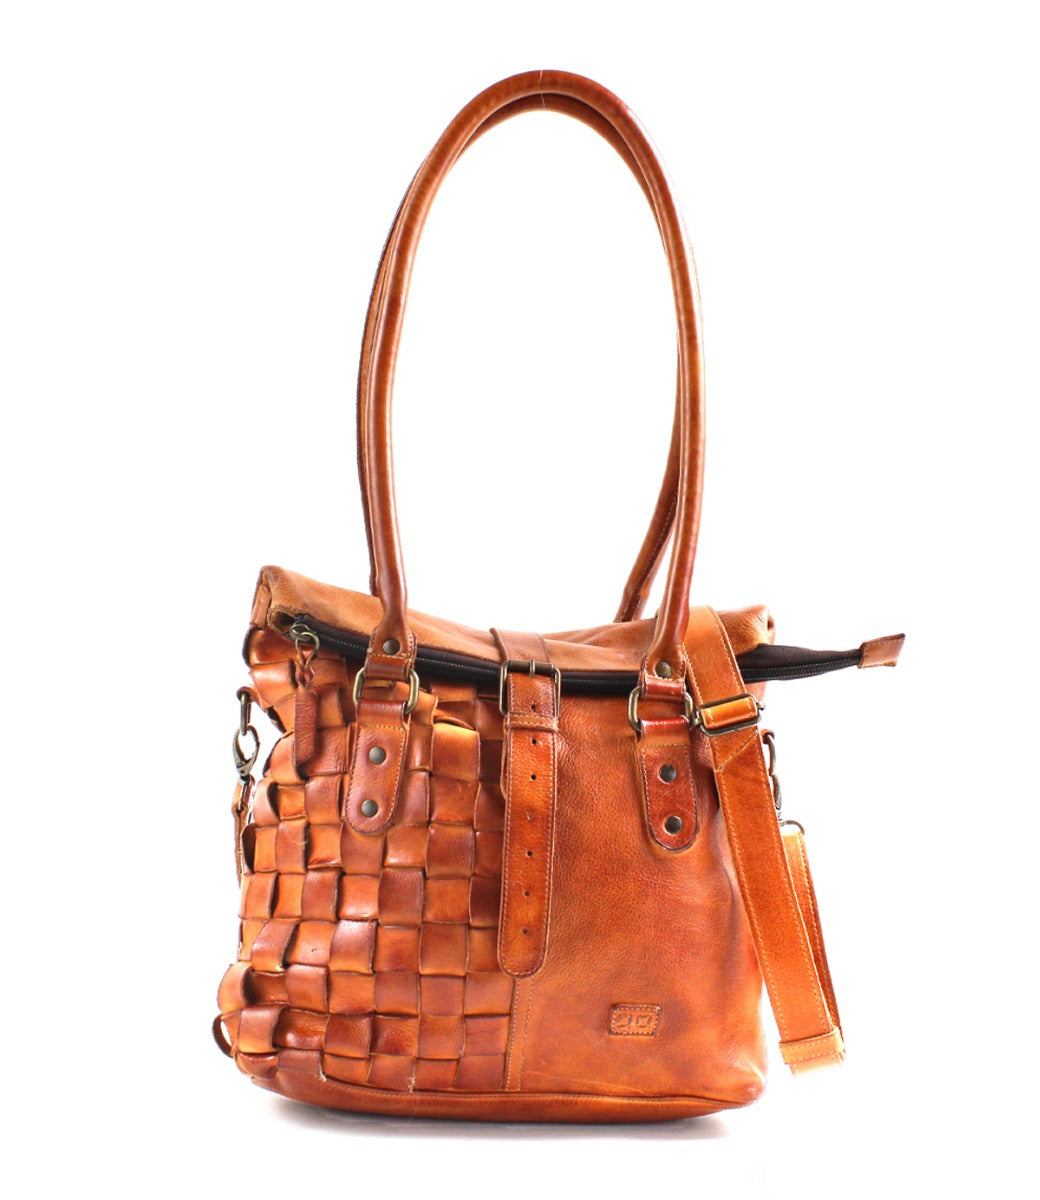 A brown leather Rachel handbag with braided straps by Bed Stu.